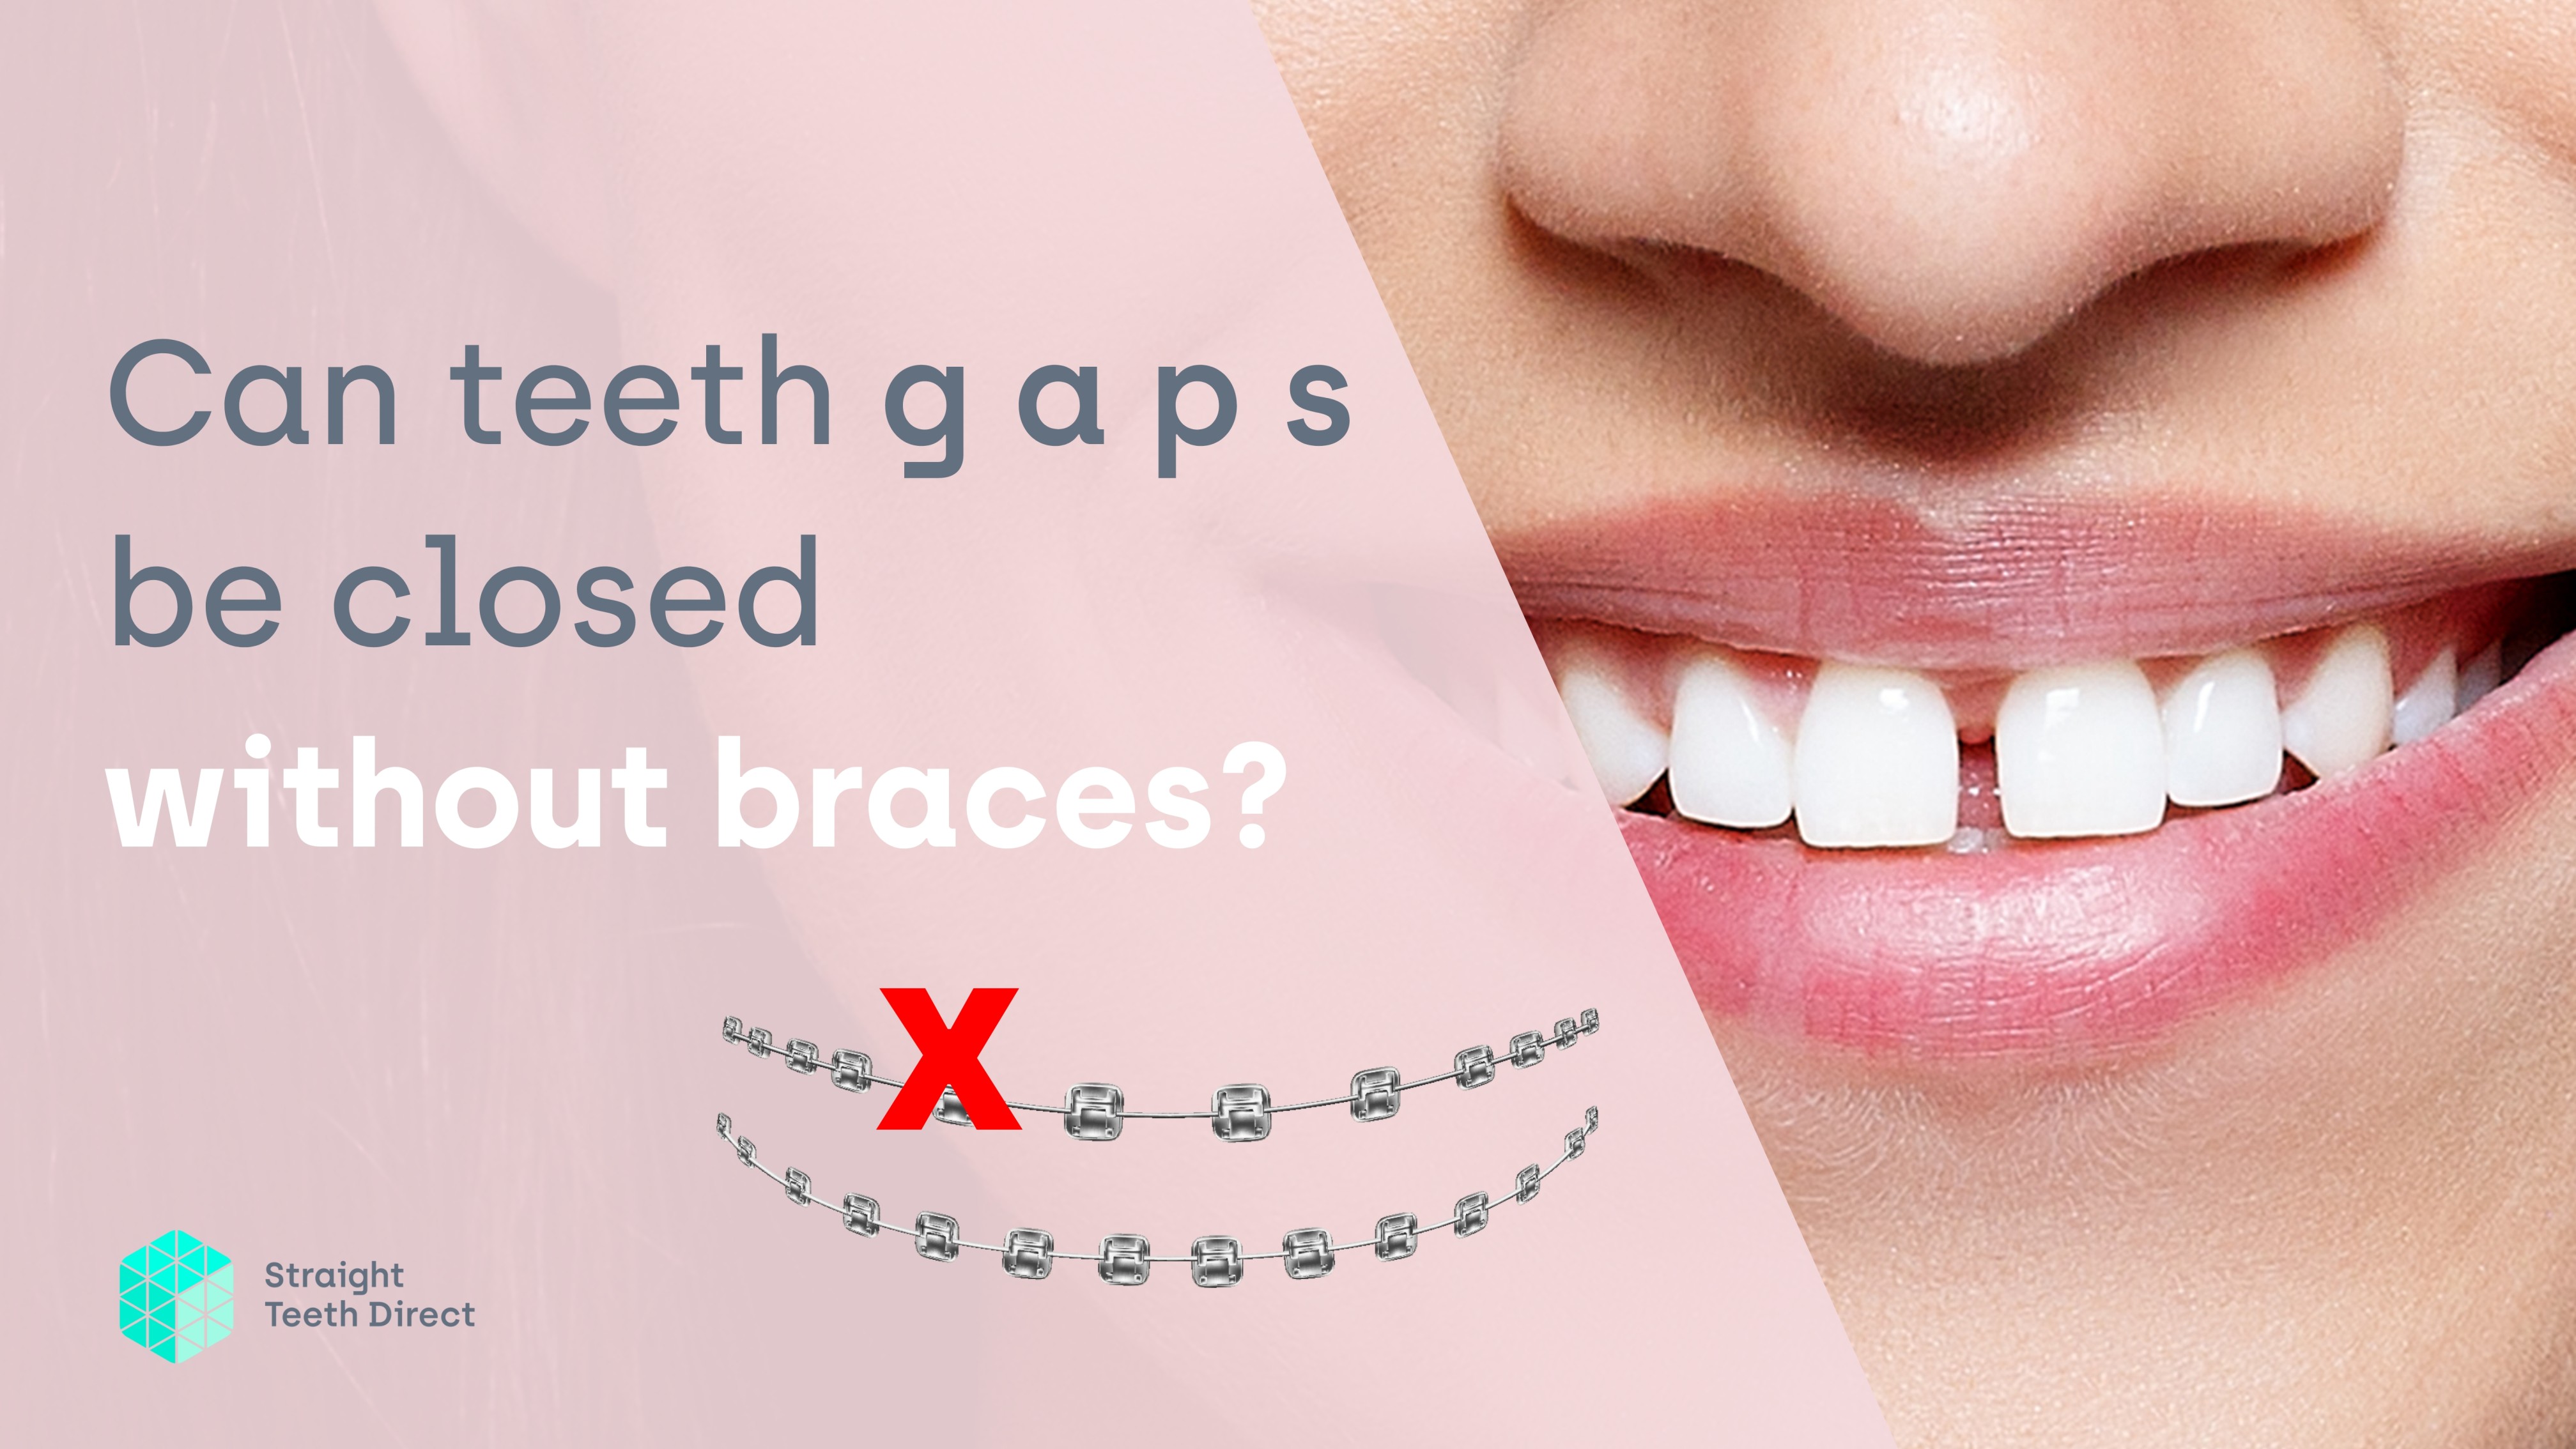 Teeth gaps: can they be closed without the use of braces?